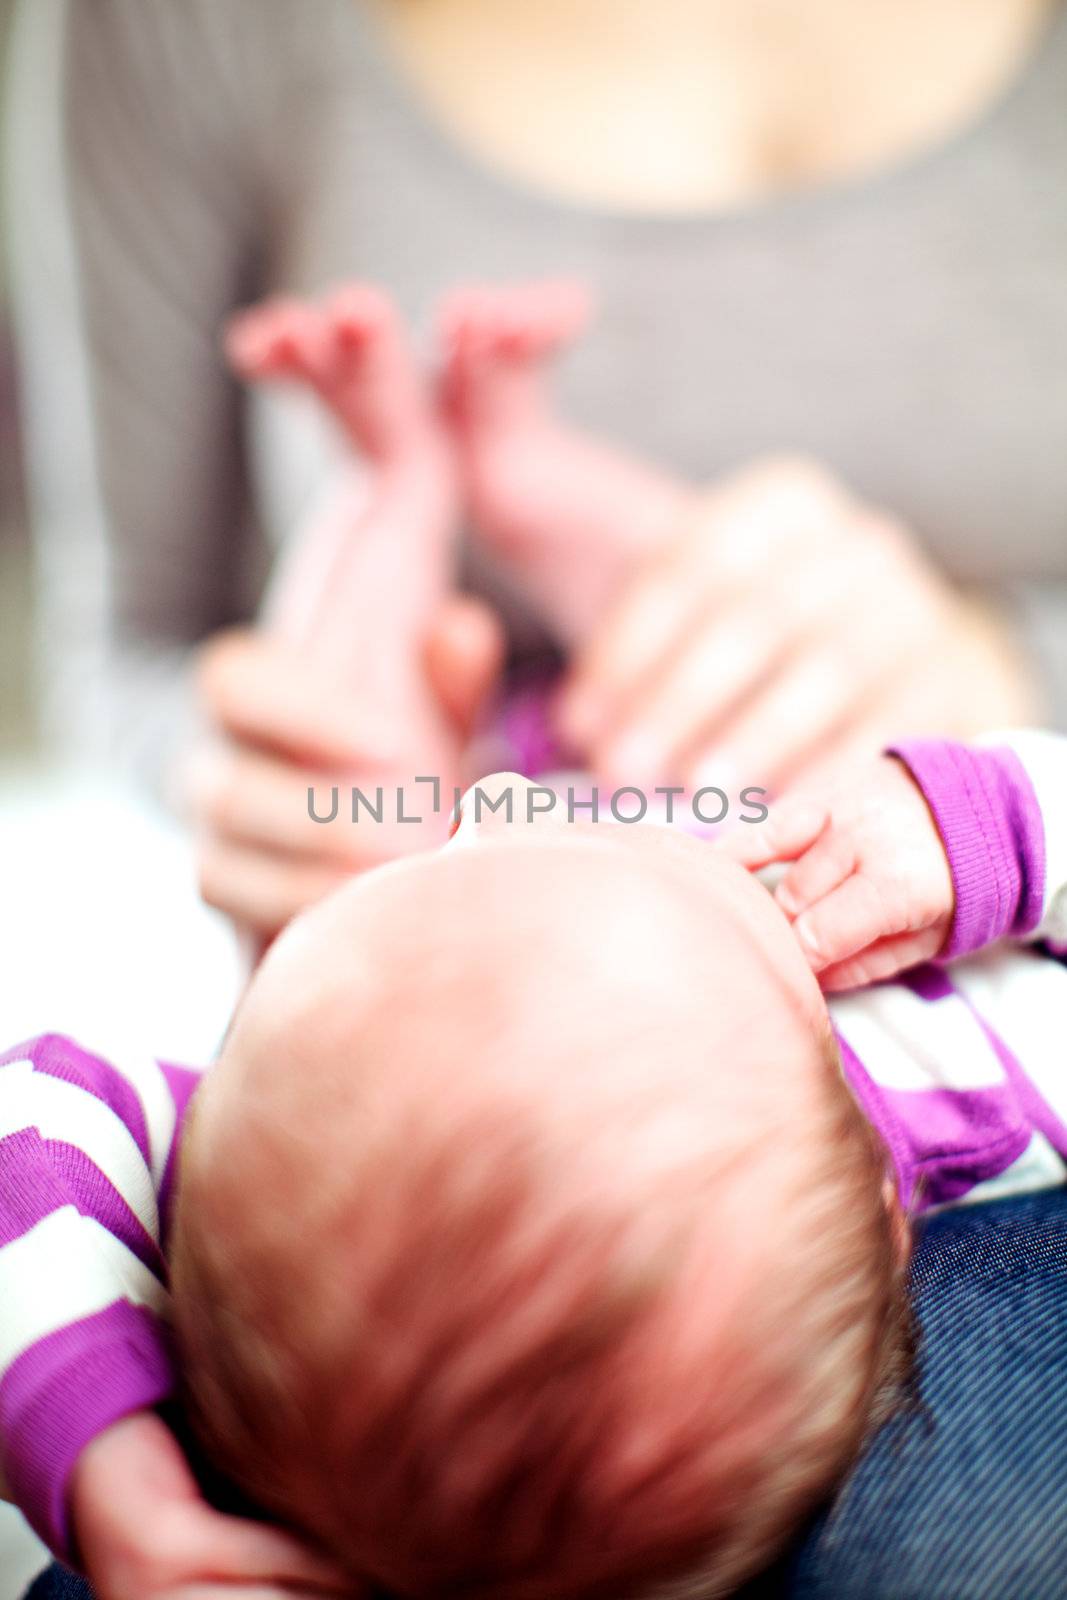 Tiny newborn baby lying on its mothers lap with its head towards the camera with shallow dof